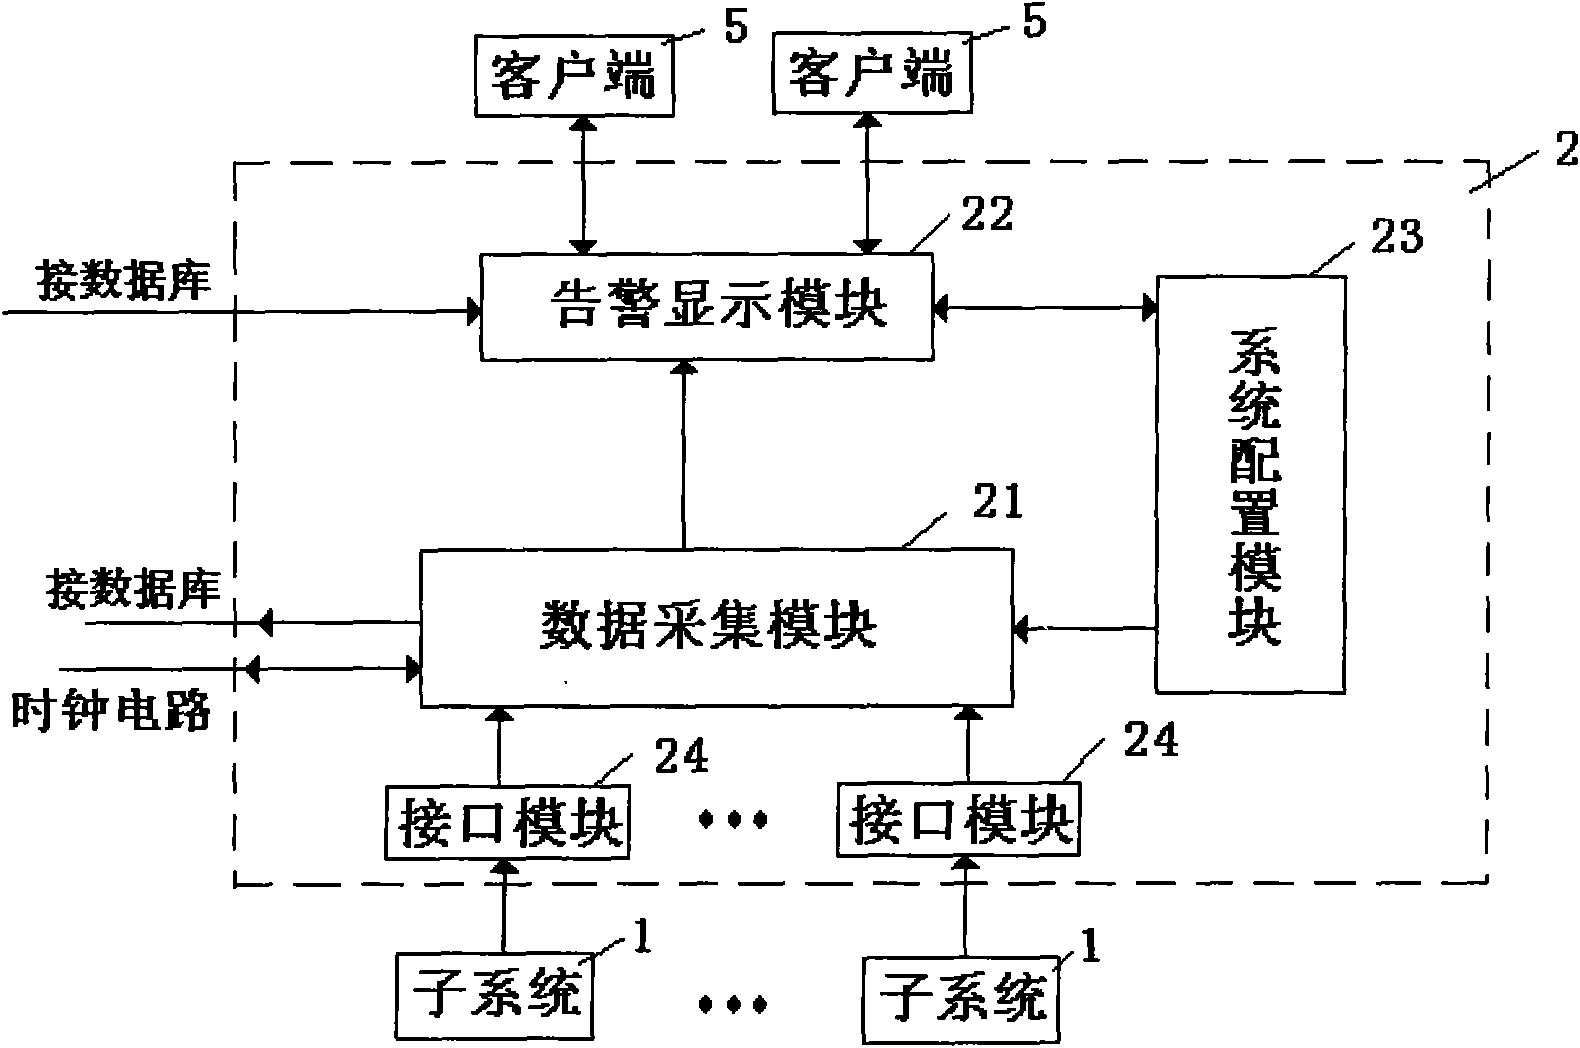 Track traffic centralized alarming management system and method thereof